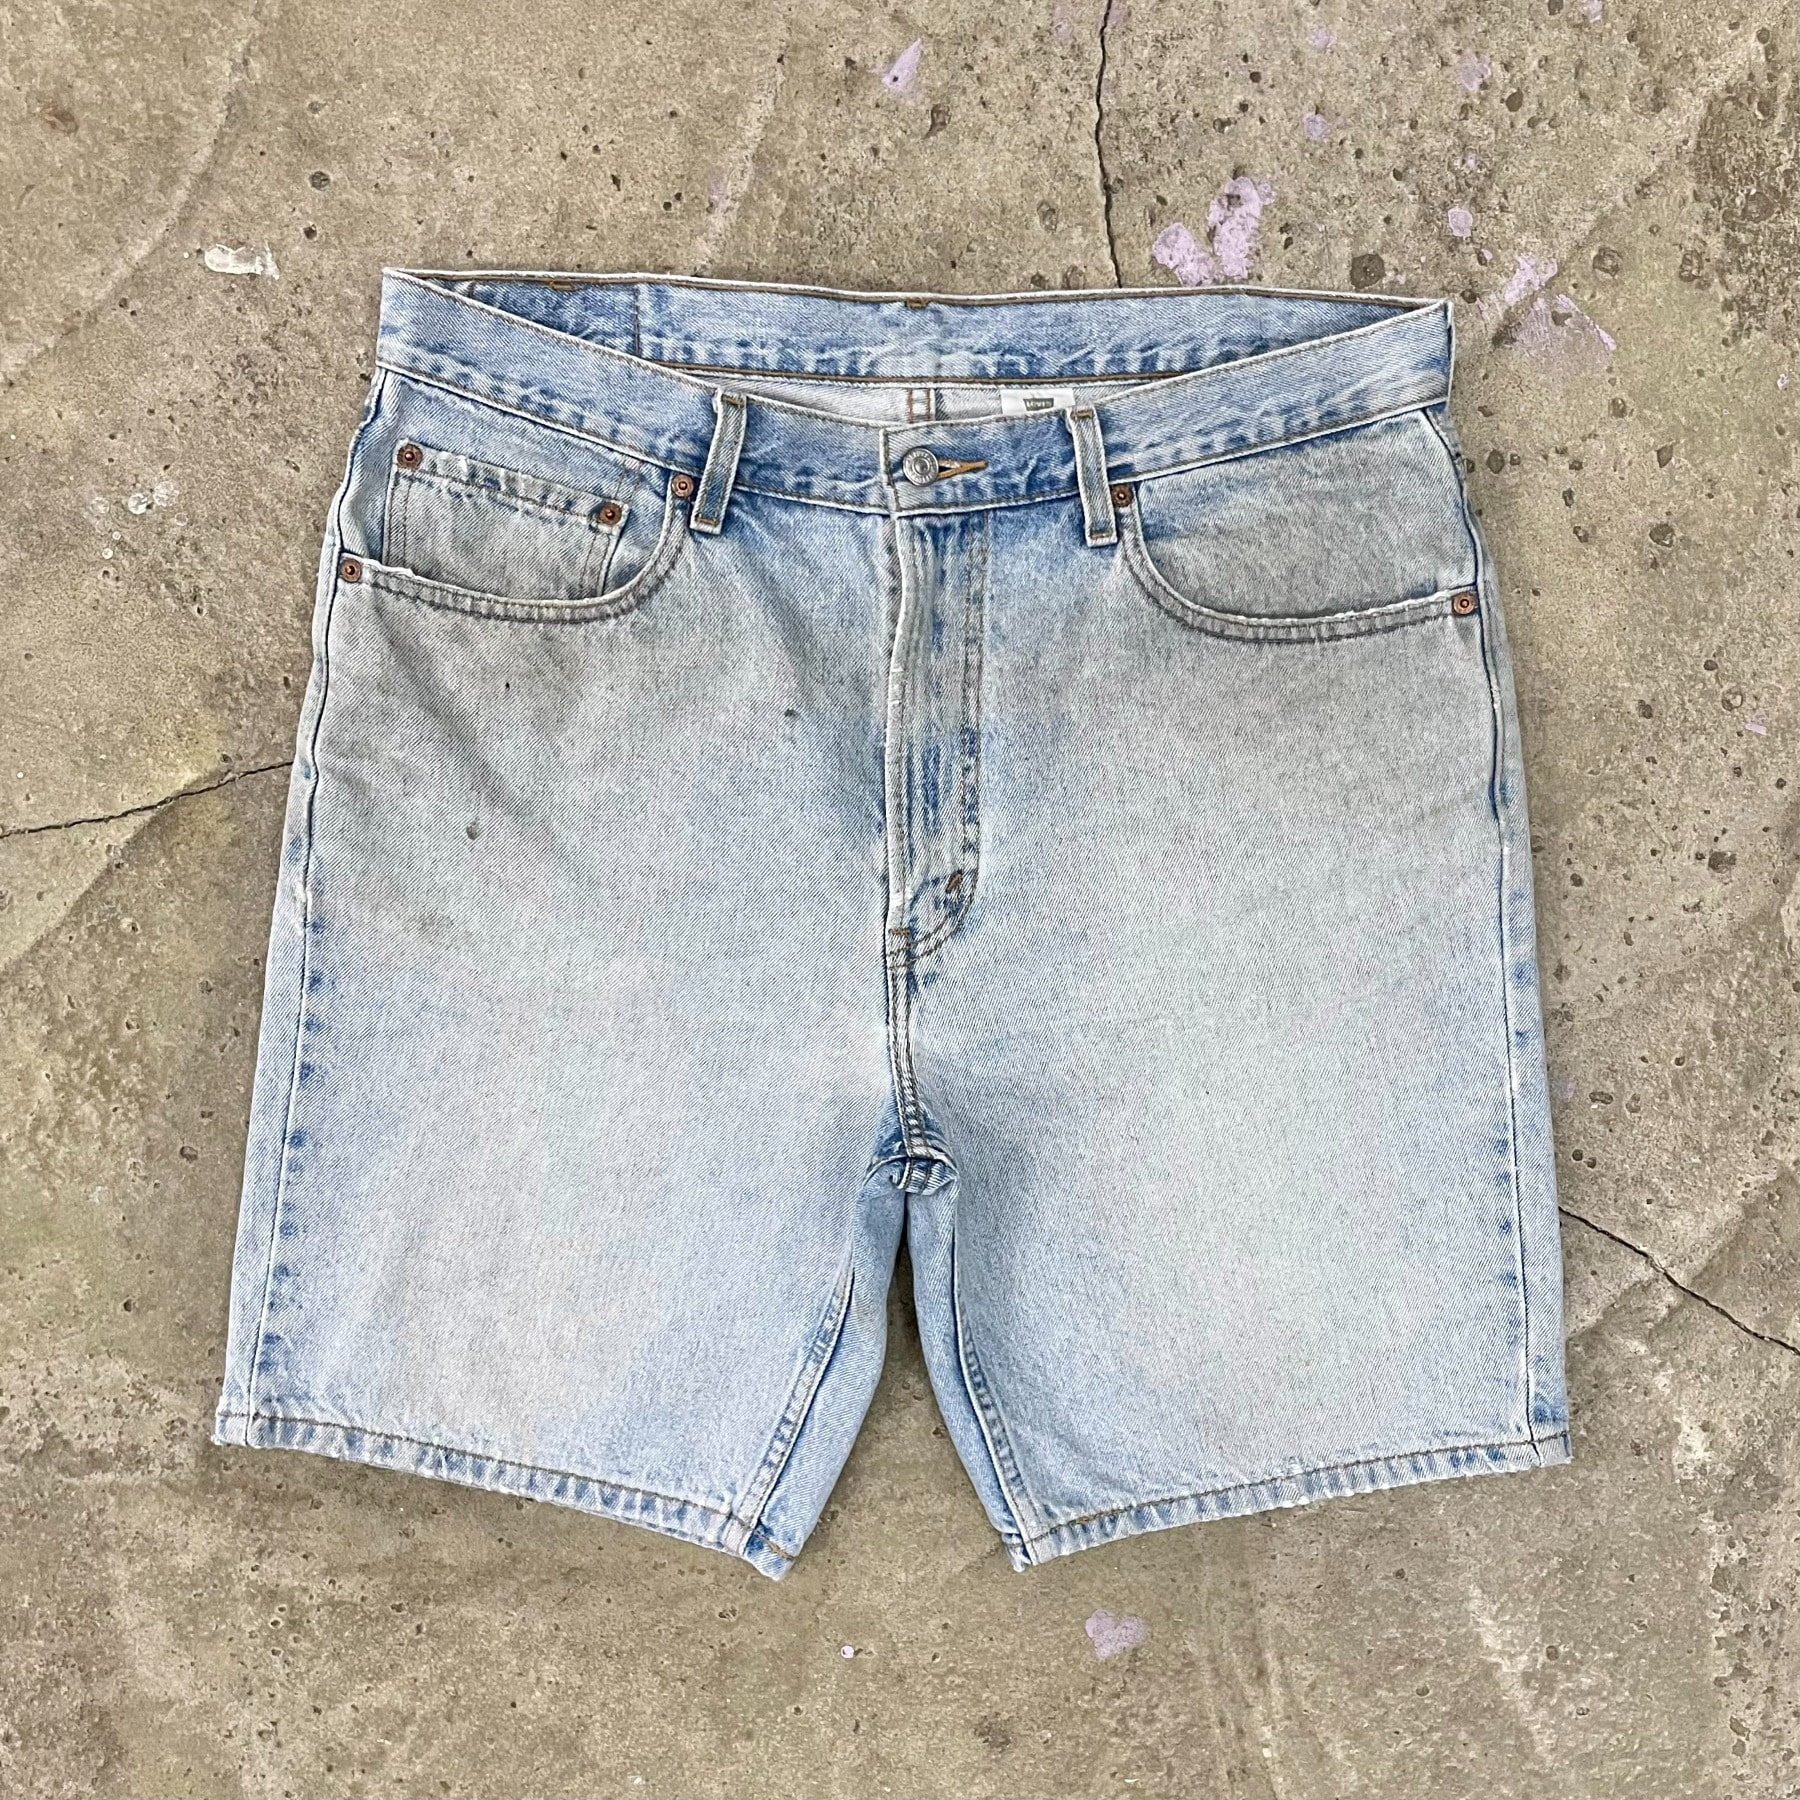 00&#039;s Levis 505 Shorts - 36inch